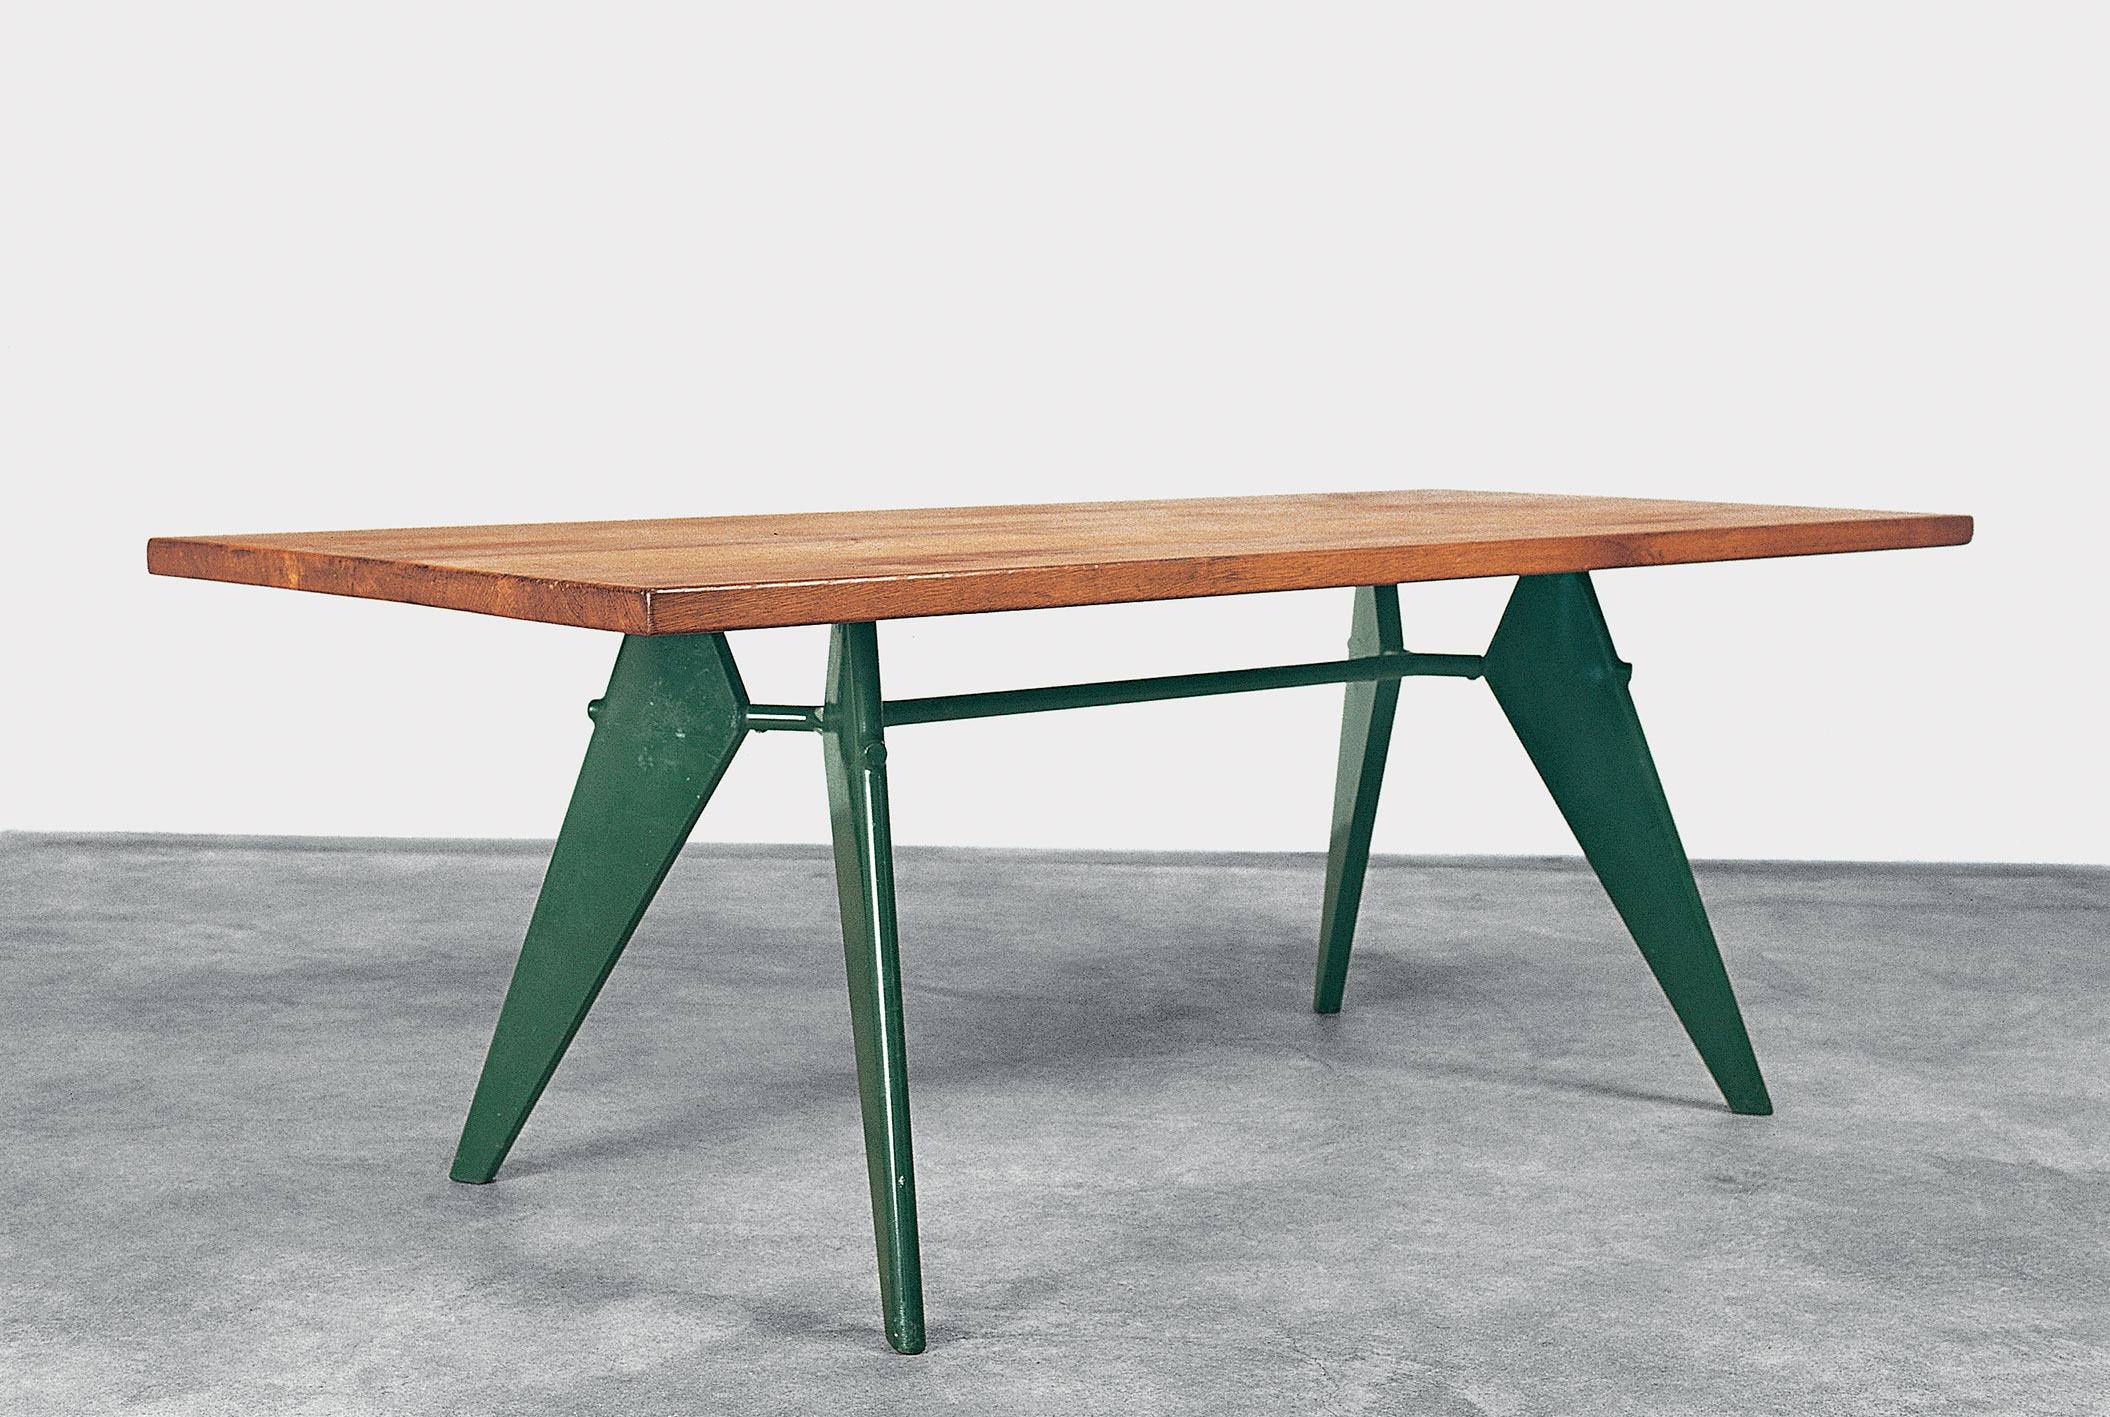 S.A.M. no. 506 table, 1951.